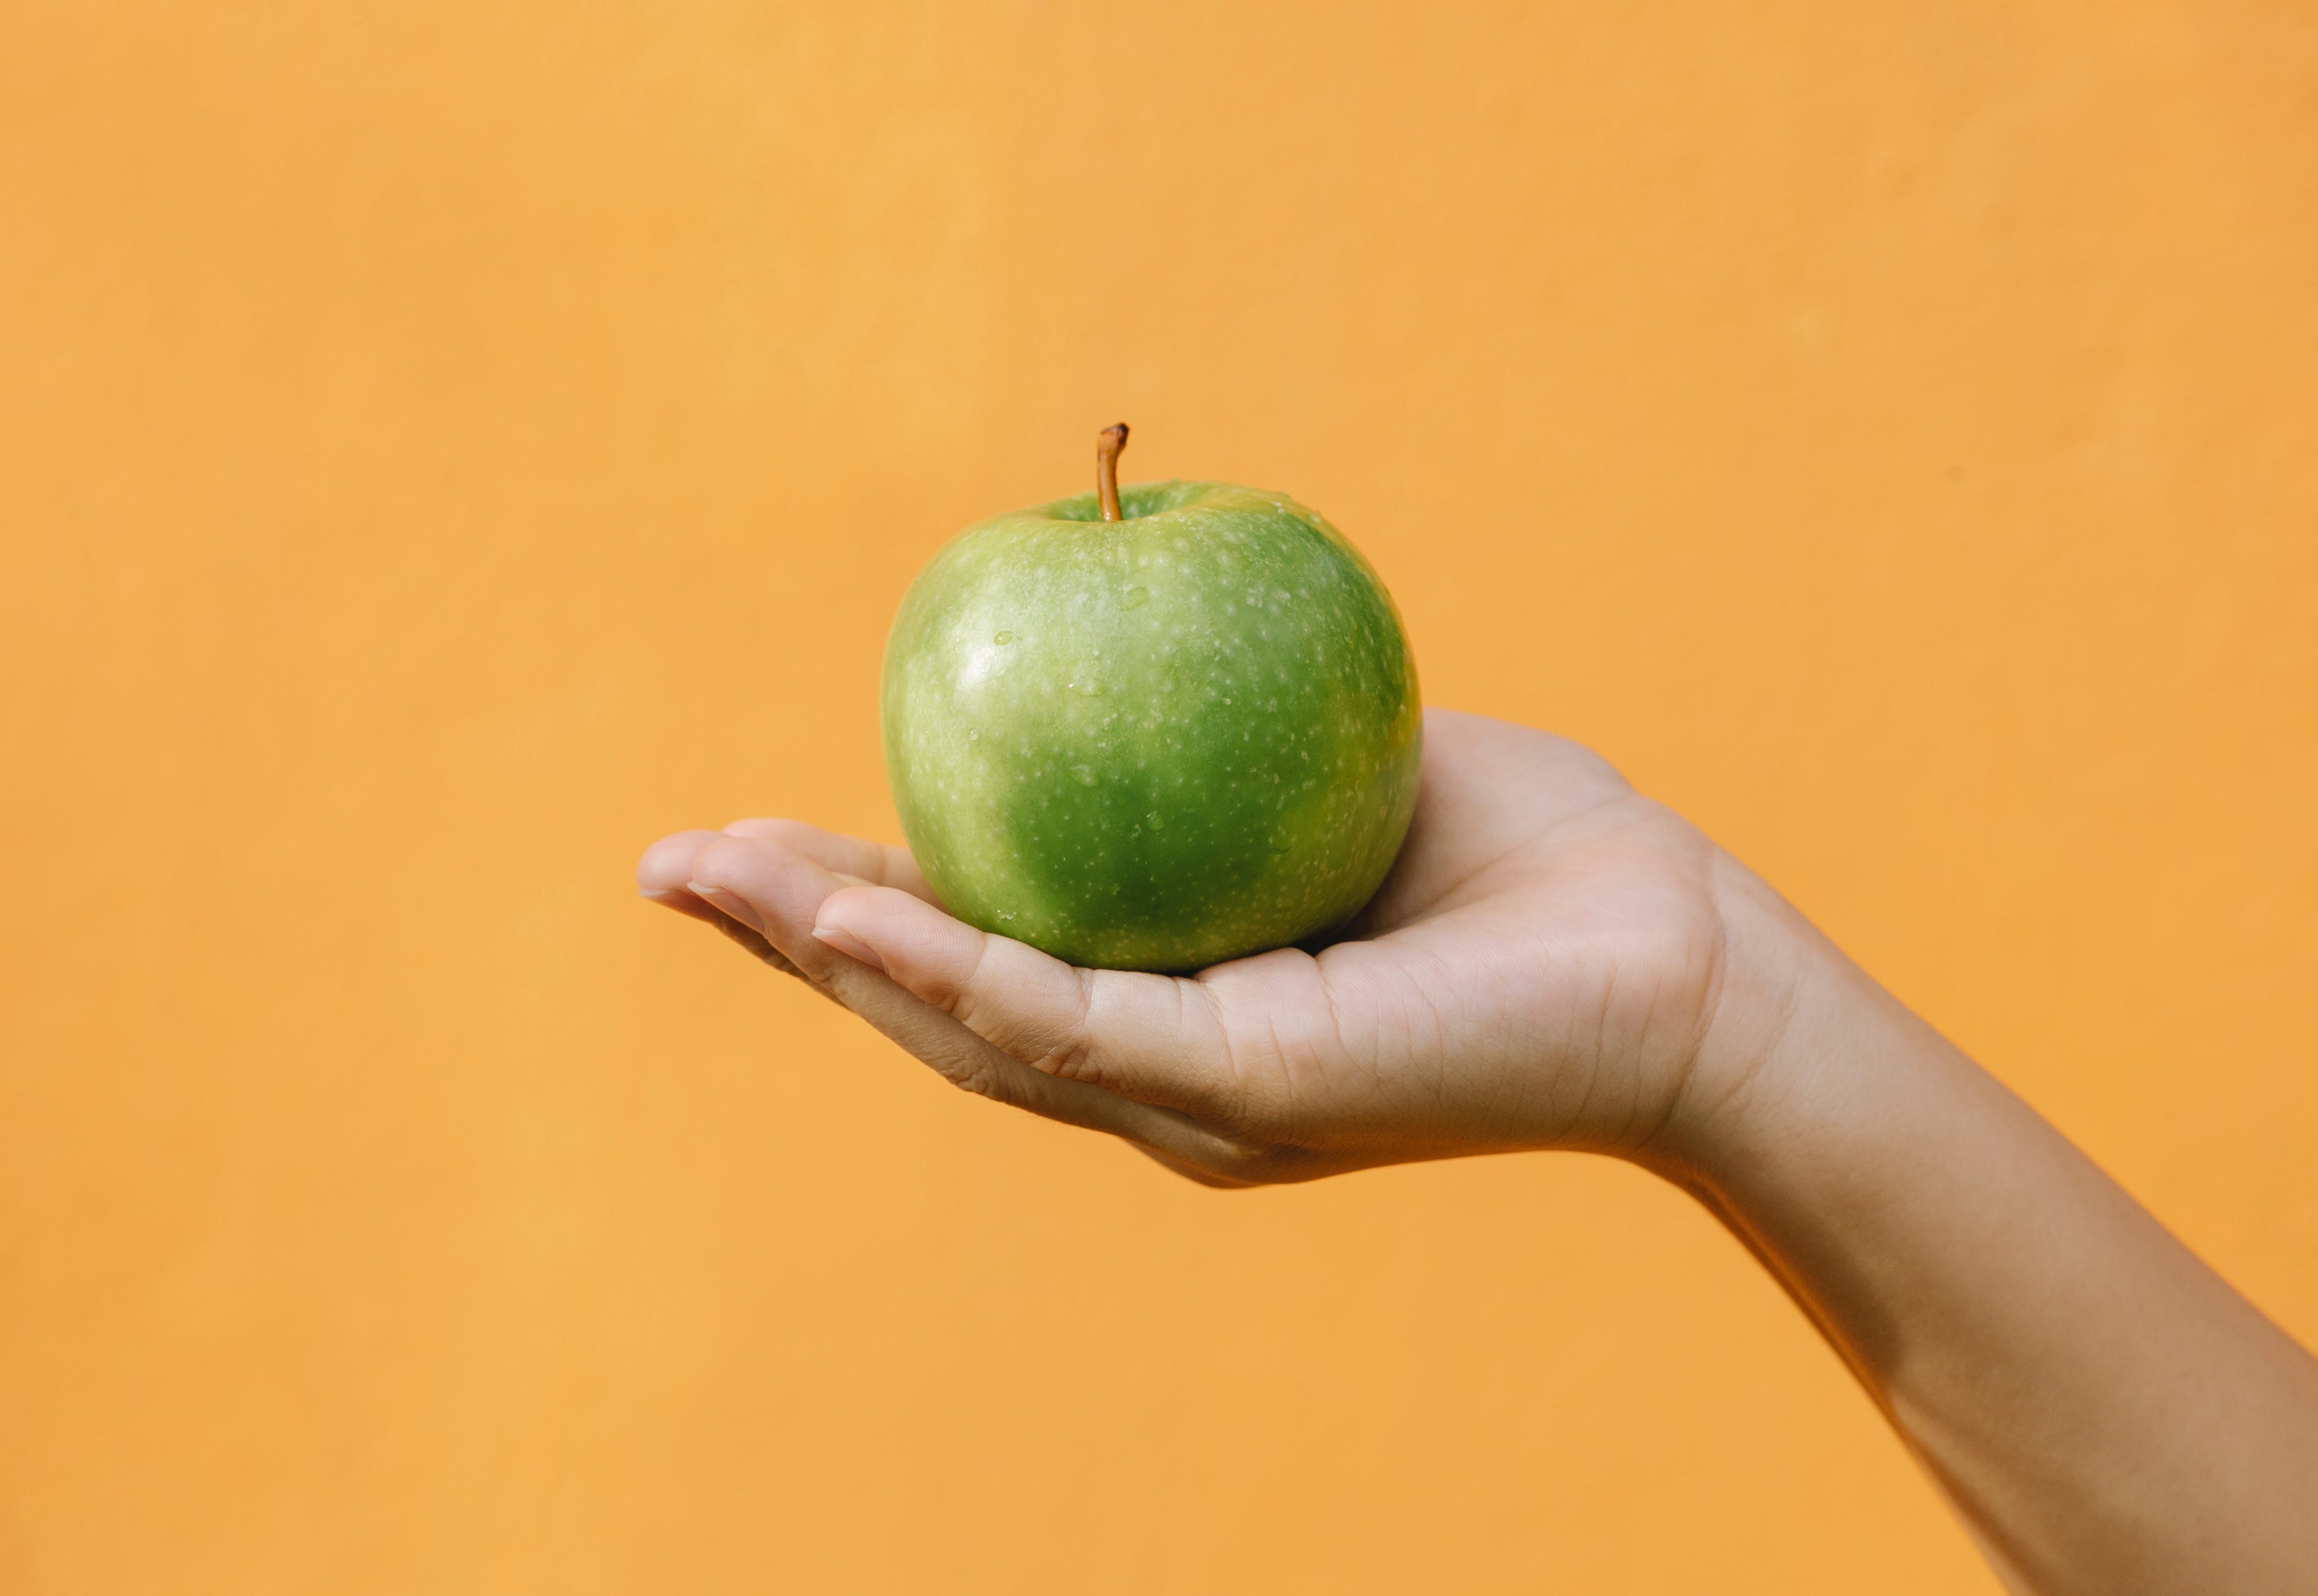 Apple being held in a hand- healthy eating for weight loss